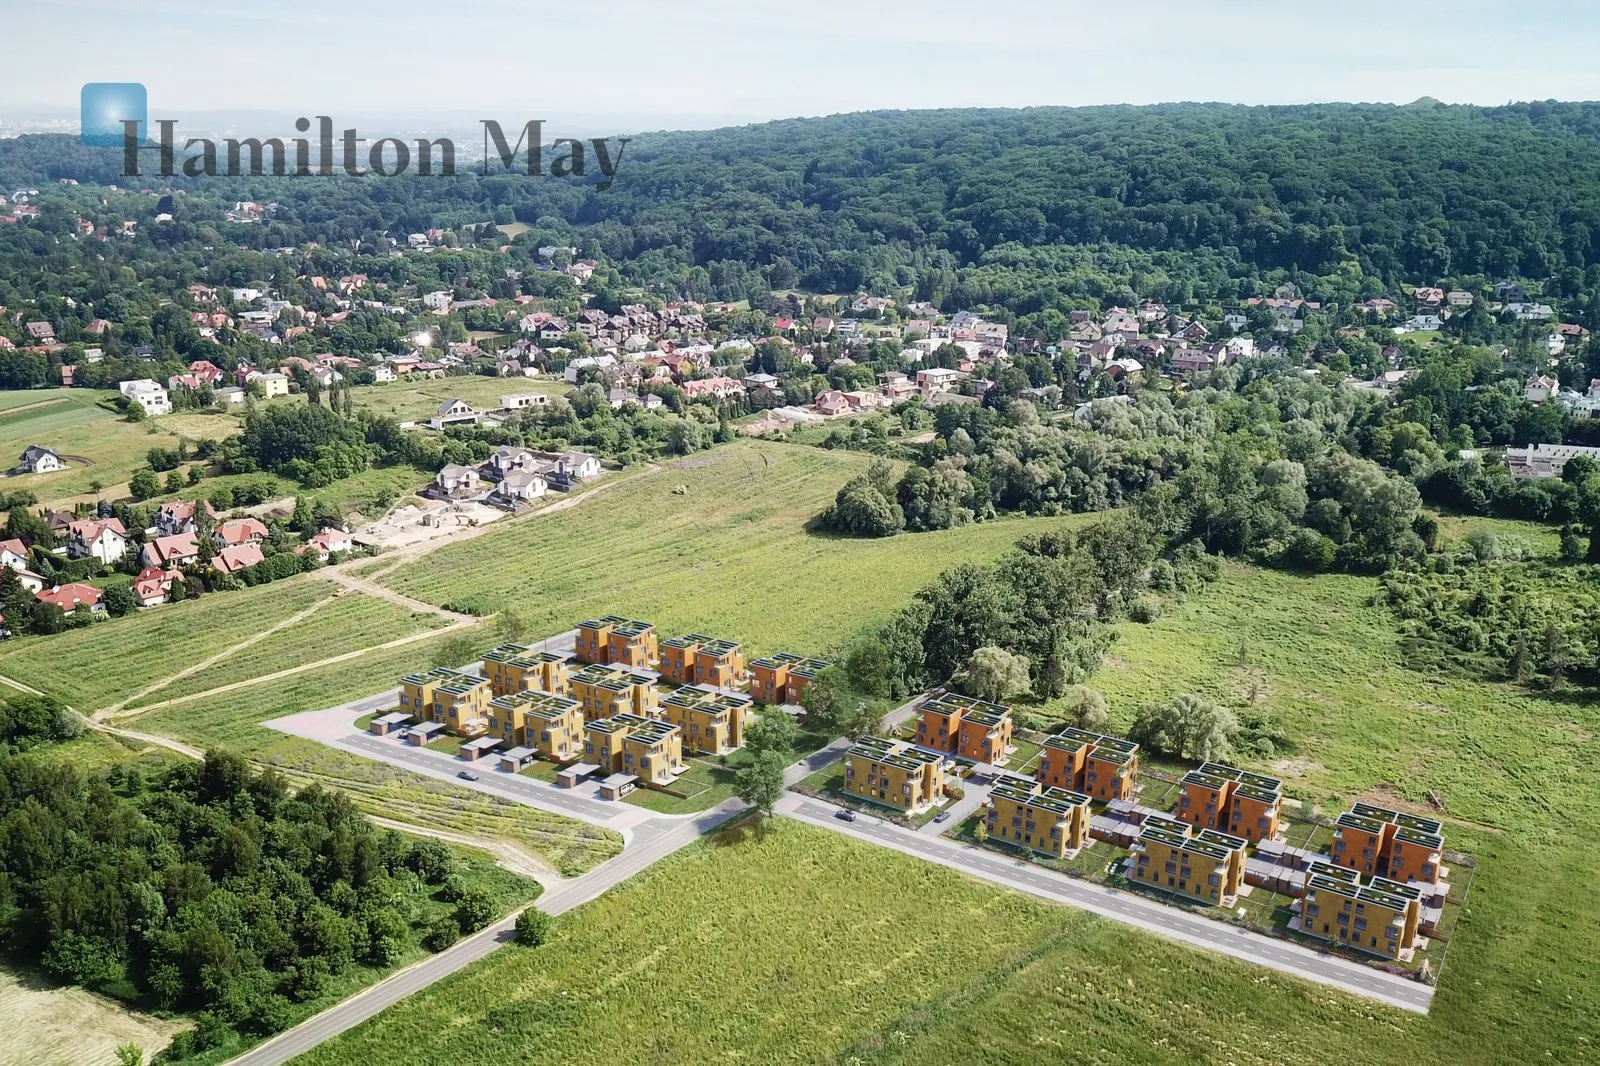 Subregion: Wola Justowska Distance to centre: 6.49 km Level: 1 Price: 1591185.26 PLN Bedrooms: 3 Bathrooms: 3 Size: 117m2 Price/m2: 13600 PLN